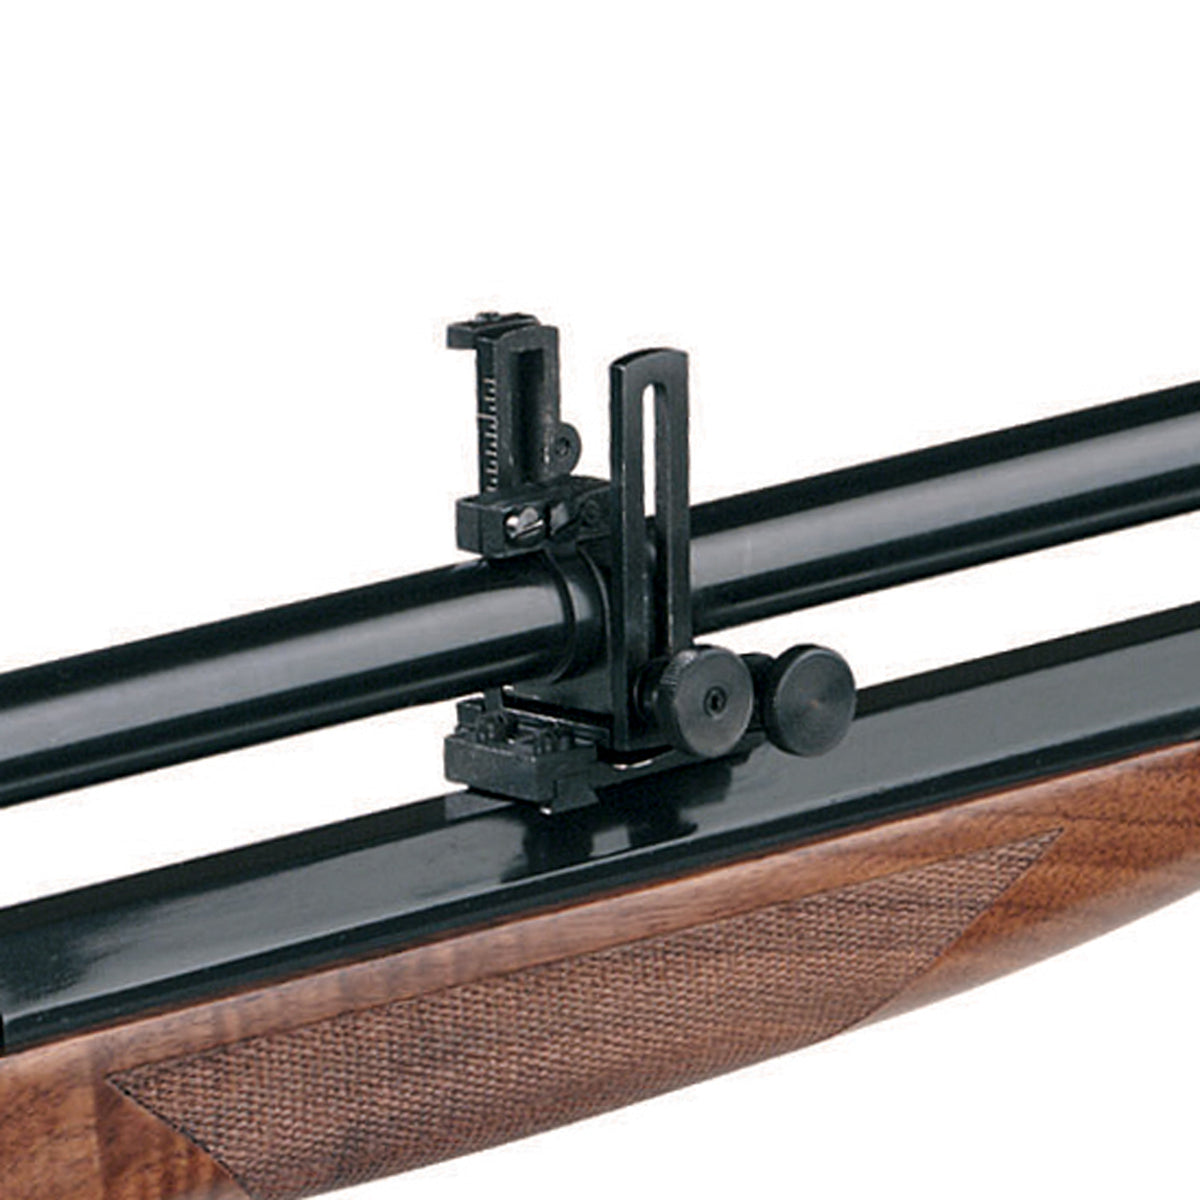 The rear mount of the 6X Long Malcolm scope, showing the dovetail placement